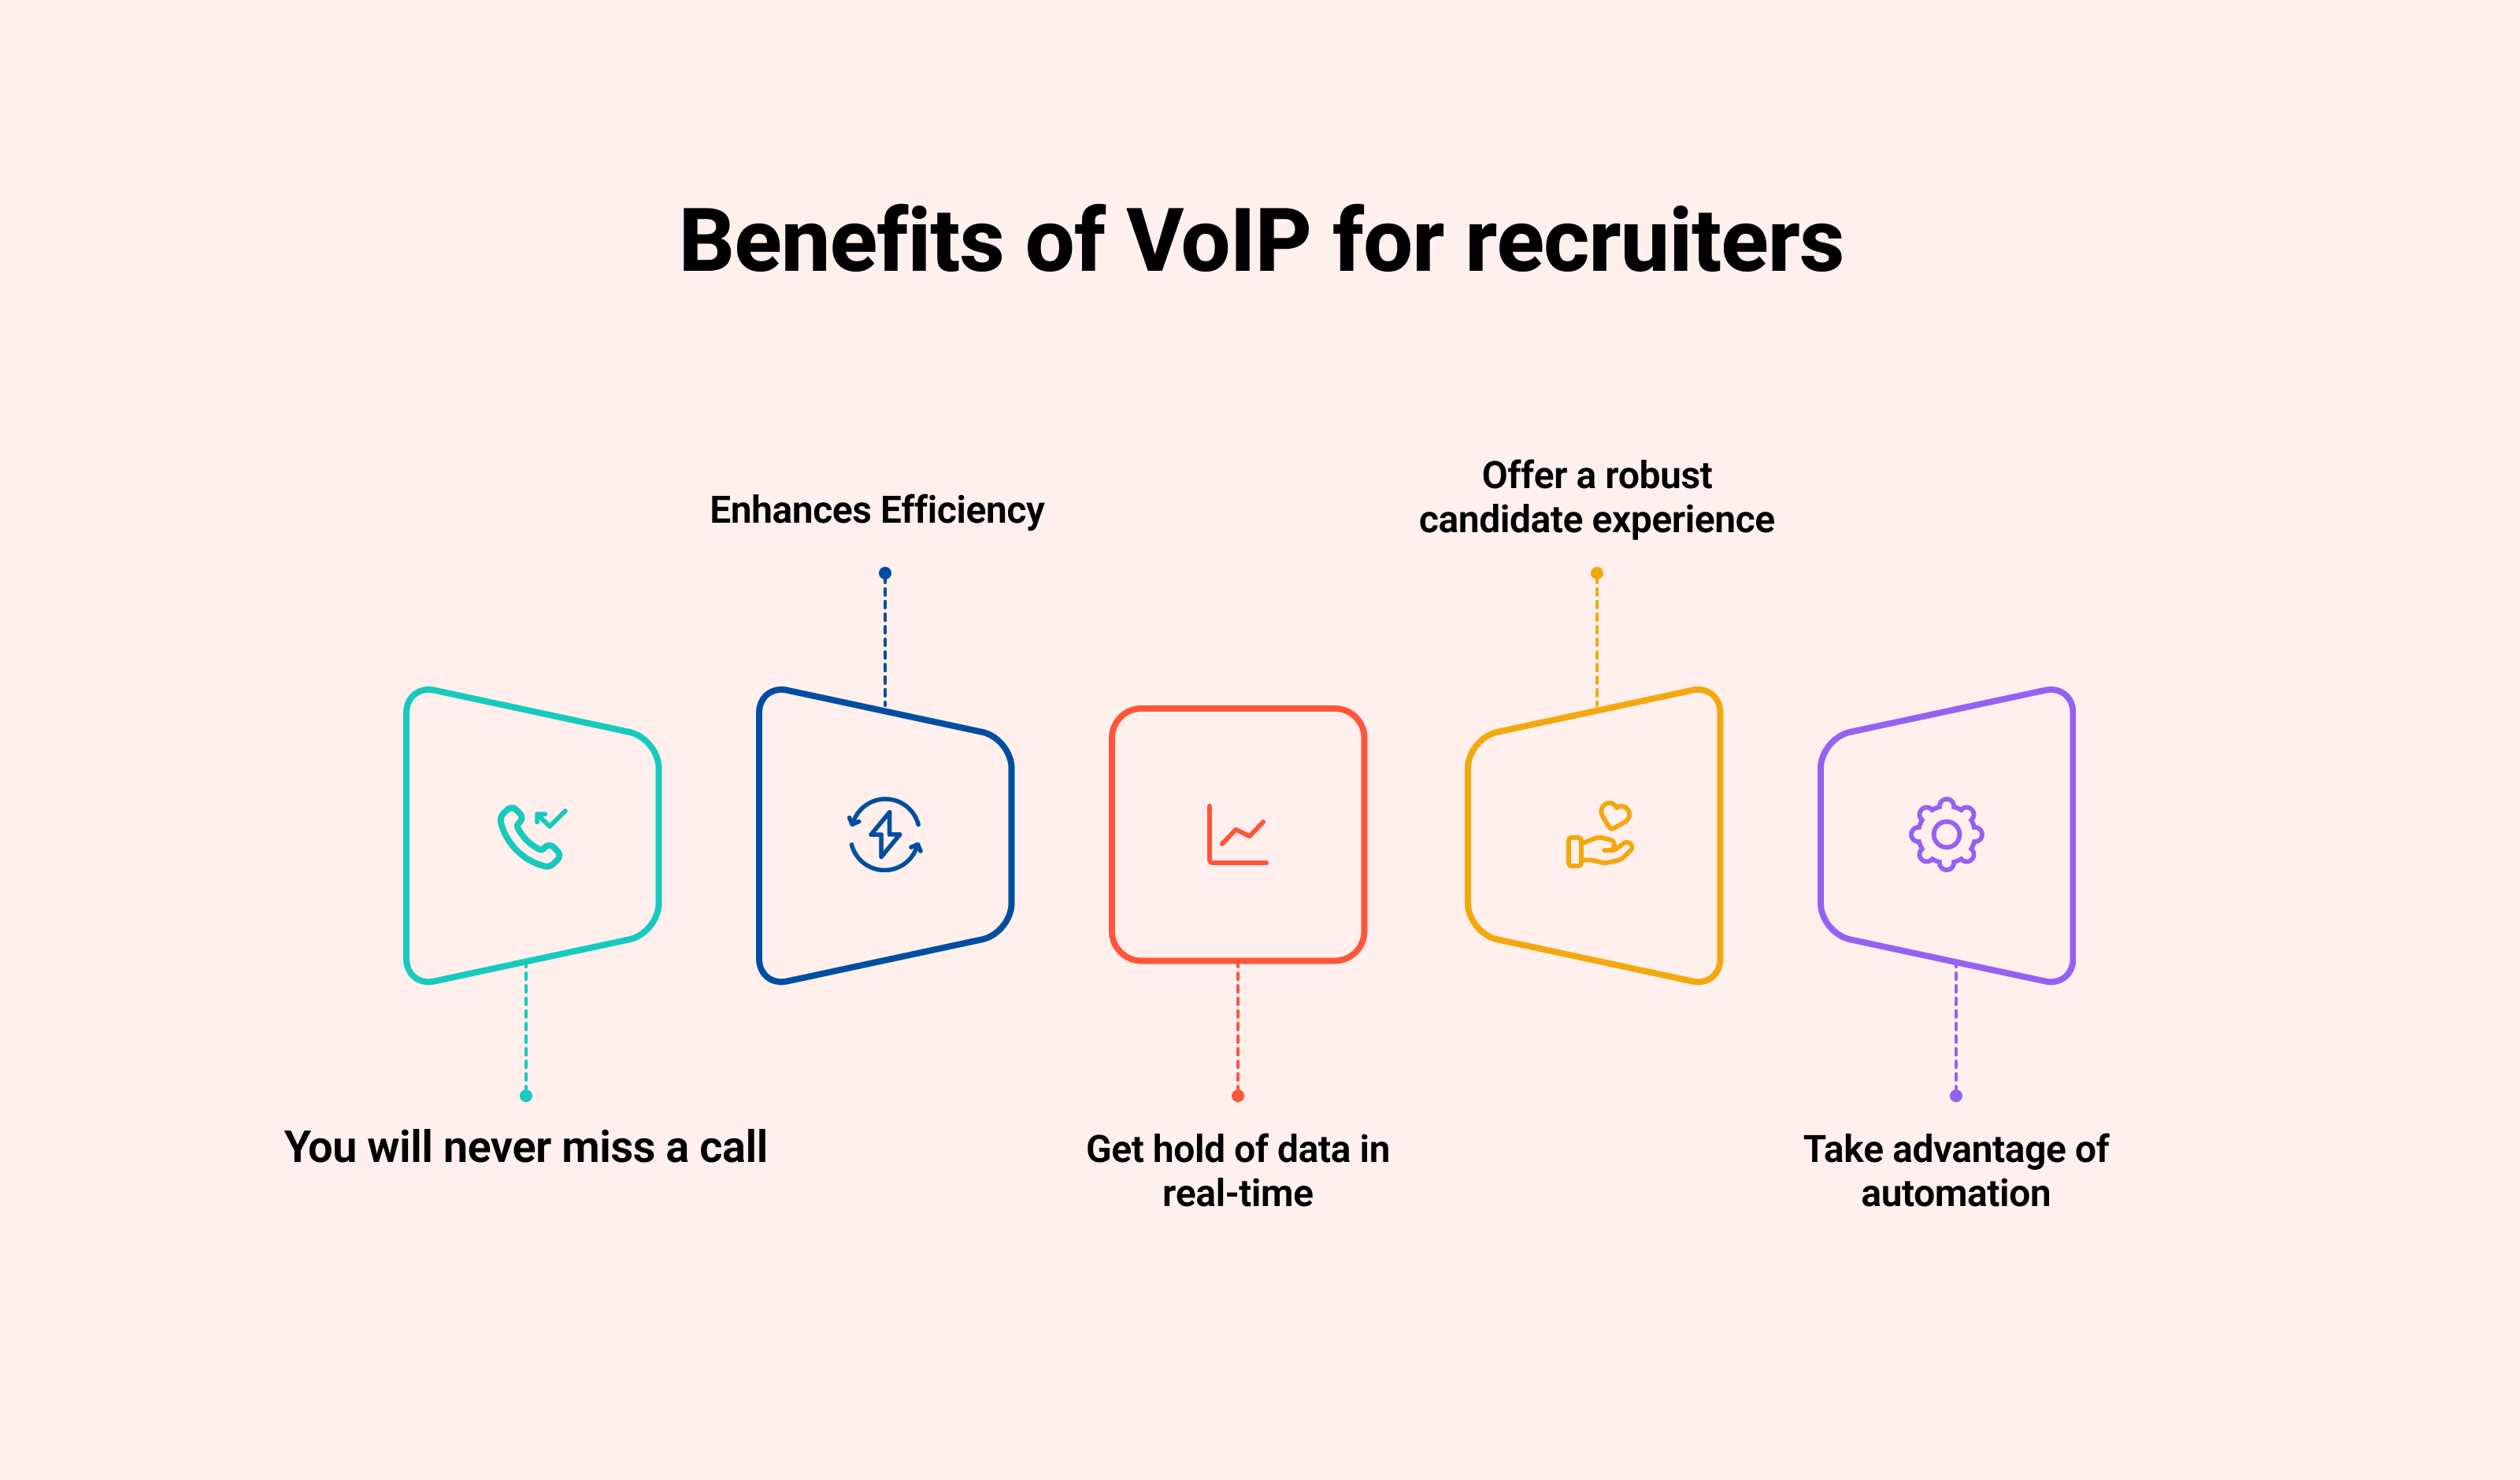 Benefits of VoIP for recruiters: